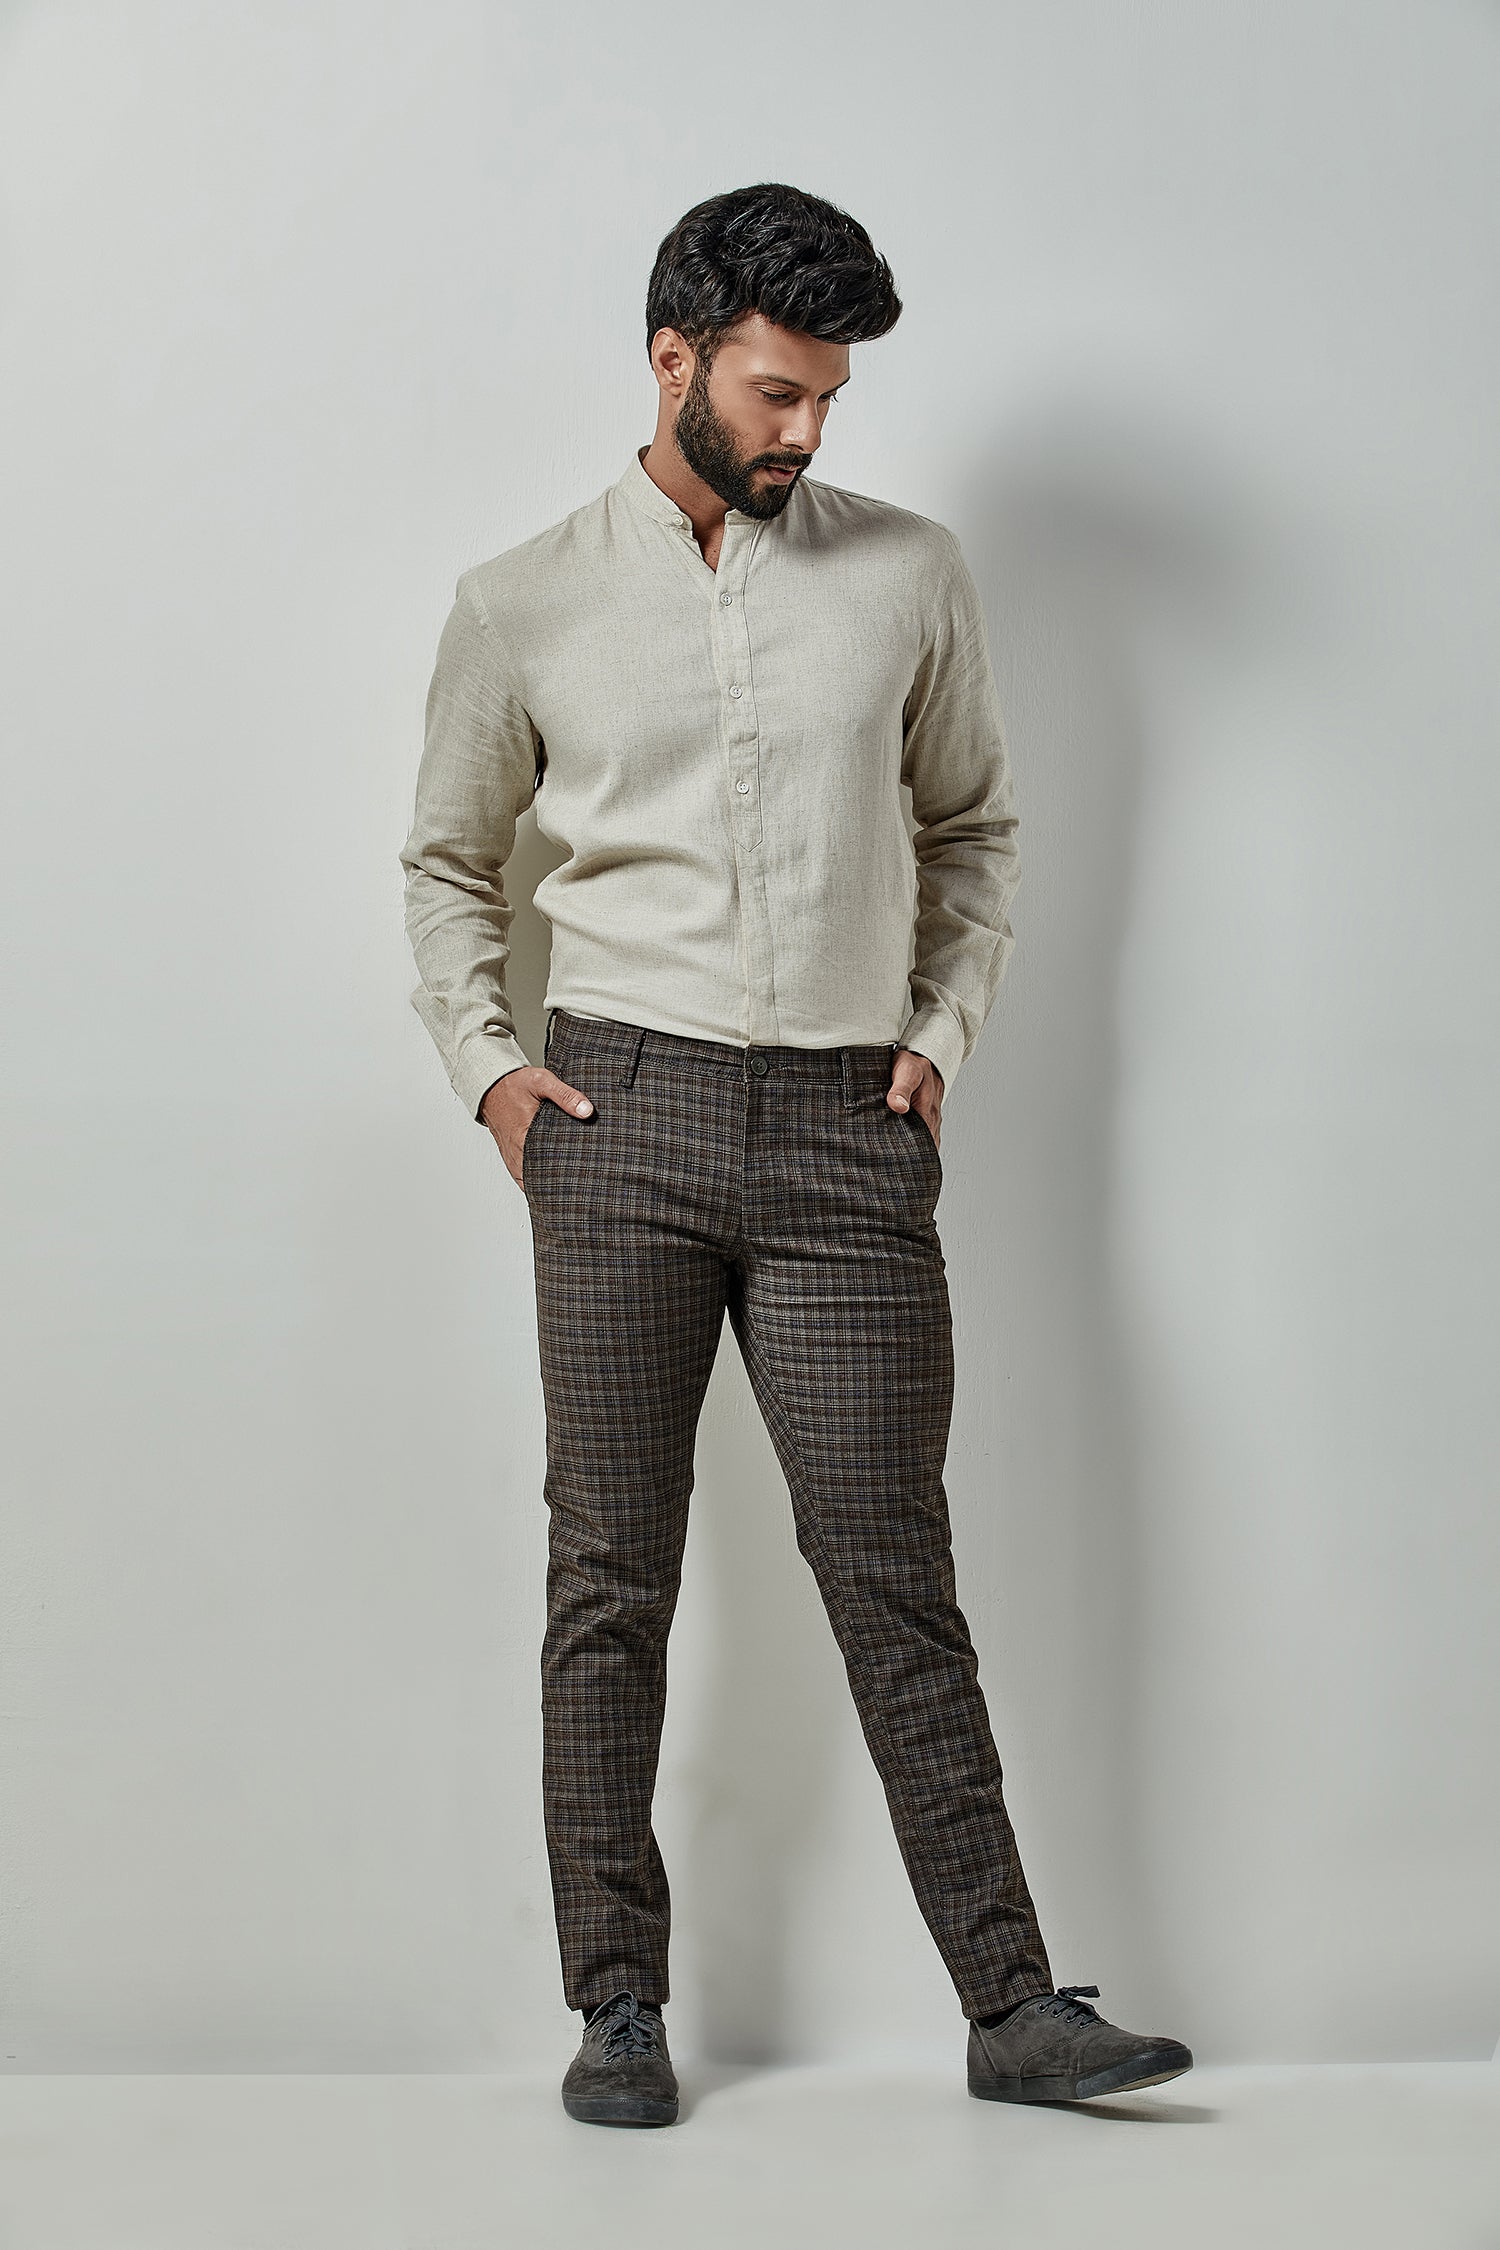 BLUE CHECKED TROUSERS | Checked trousers, Stylish pants, Mens pants